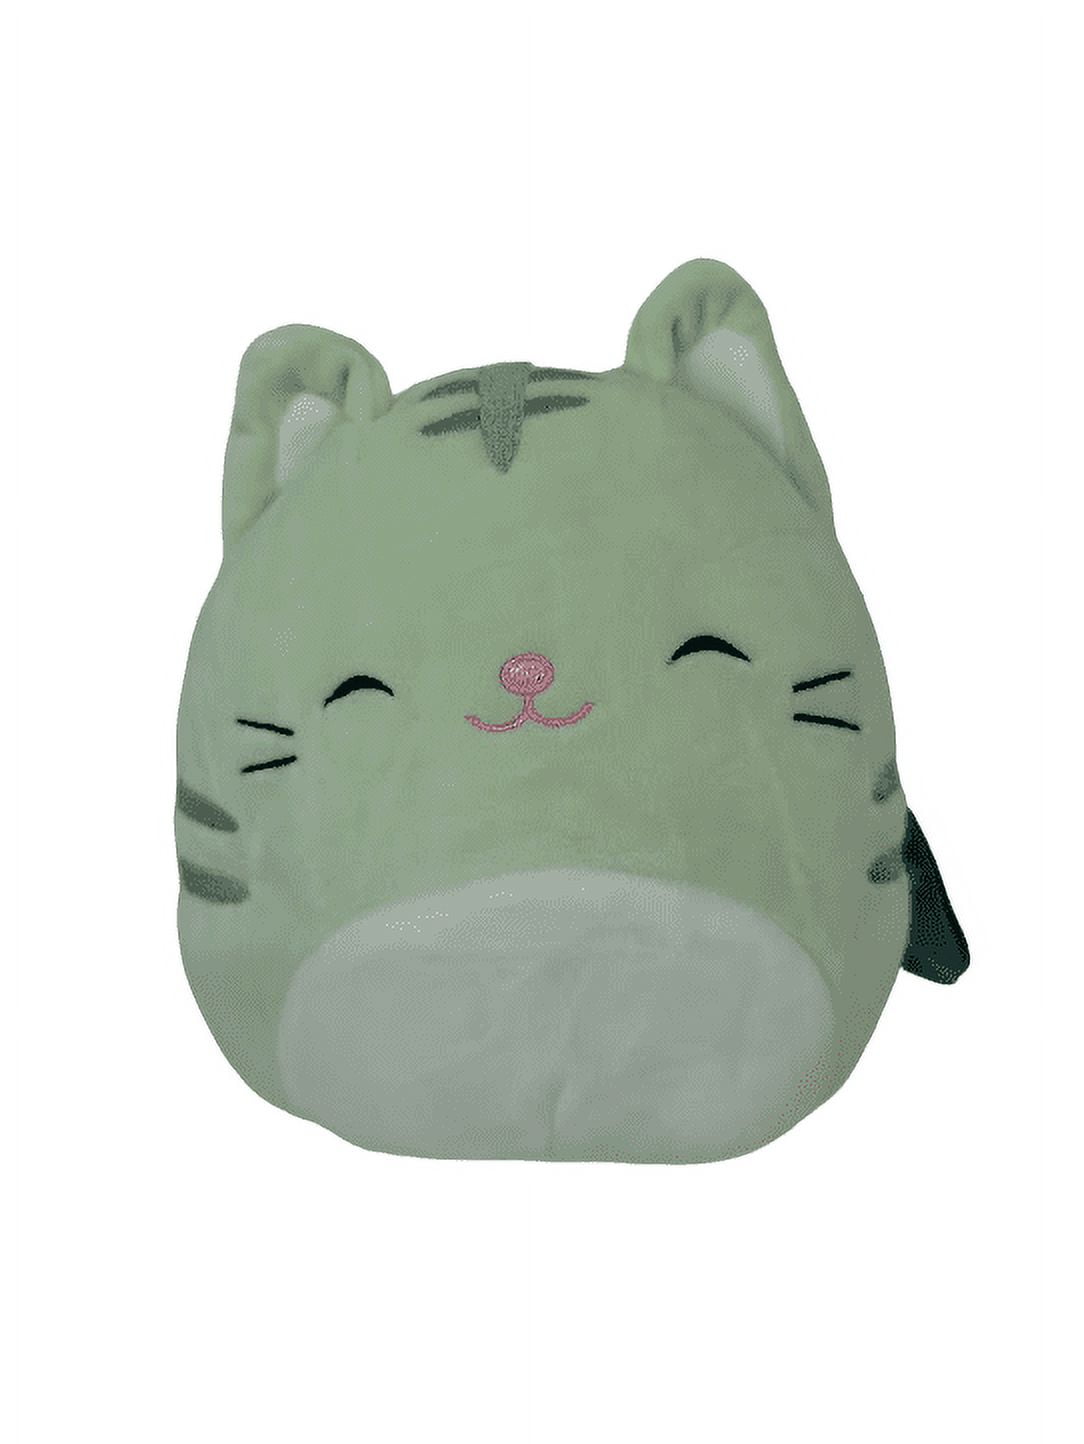 Squishmallows Official Kellytoys Plush 7 Inch Chase the Light Green Cat  Ultimate Soft Animal Plush Stuffed Toy